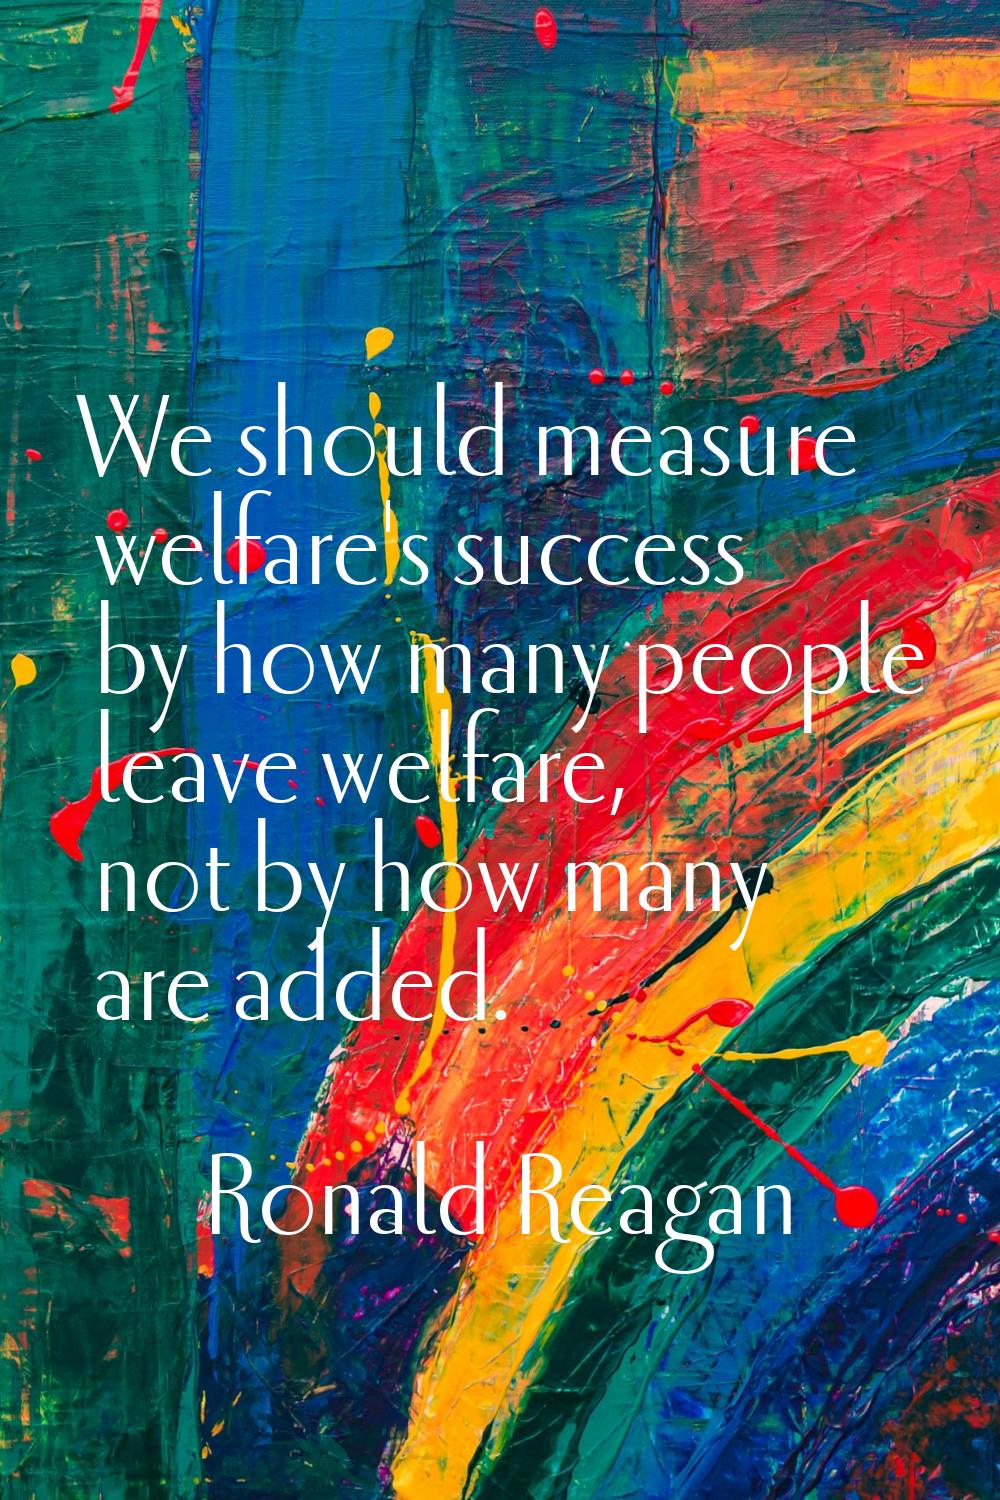 We should measure welfare's success by how many people leave welfare, not by how many are added.